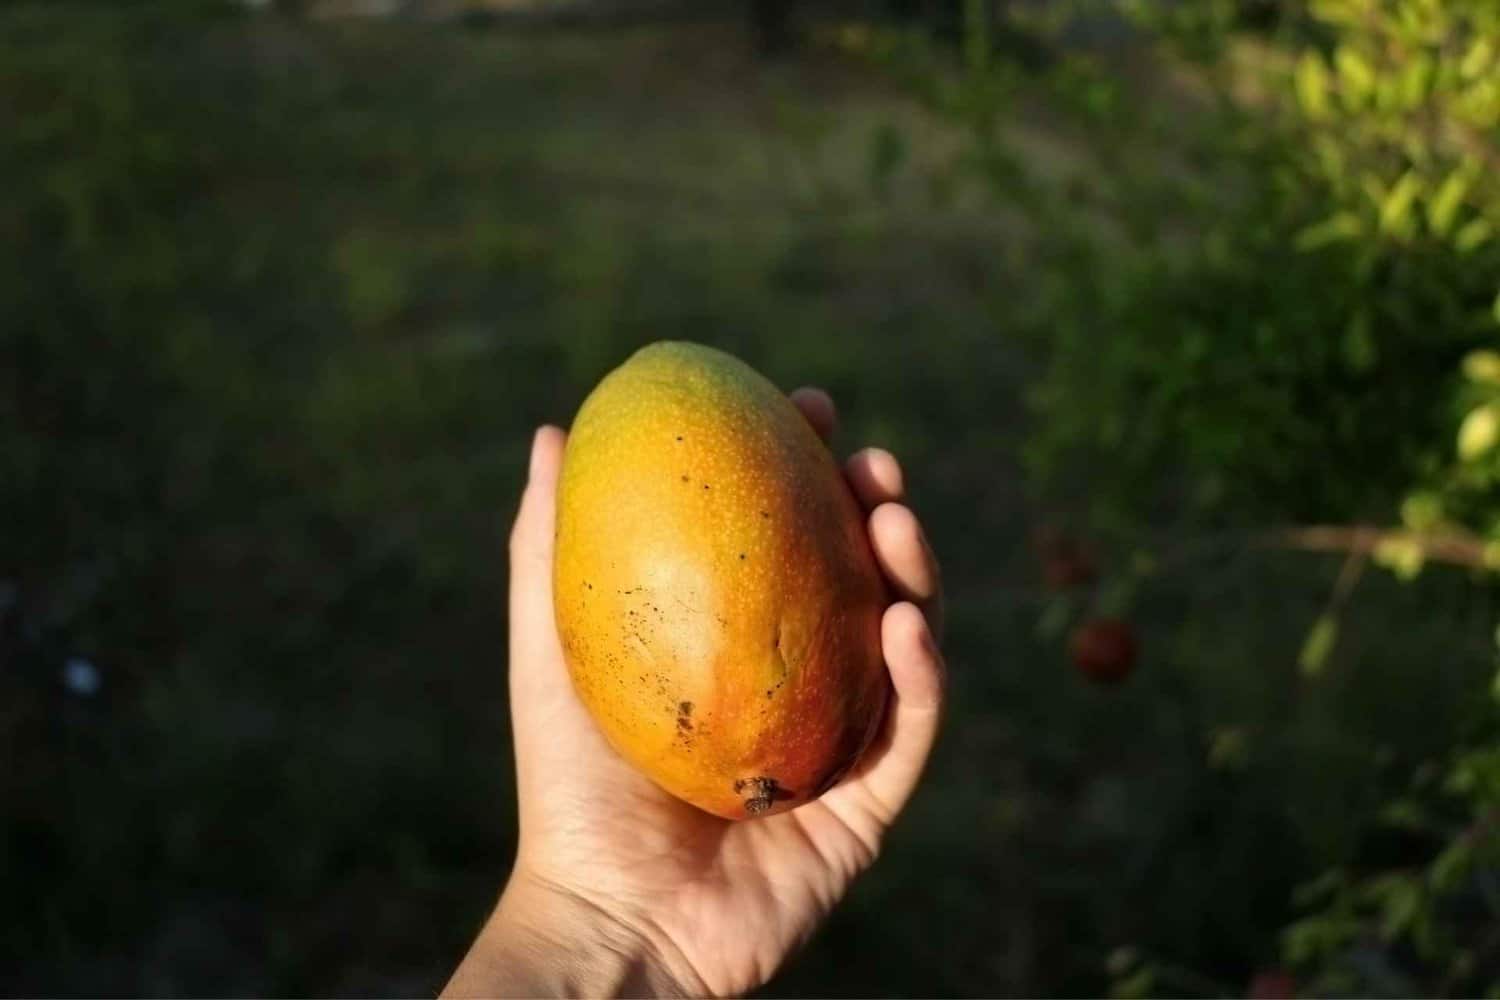 A person proudly holding a ripe mango, highlighting the fresh and delicious produce available along the Fruit Loop Drive Trail in Carnarvon during the Perth to Exmouth adventure, showcasing the region's agricultural abundance